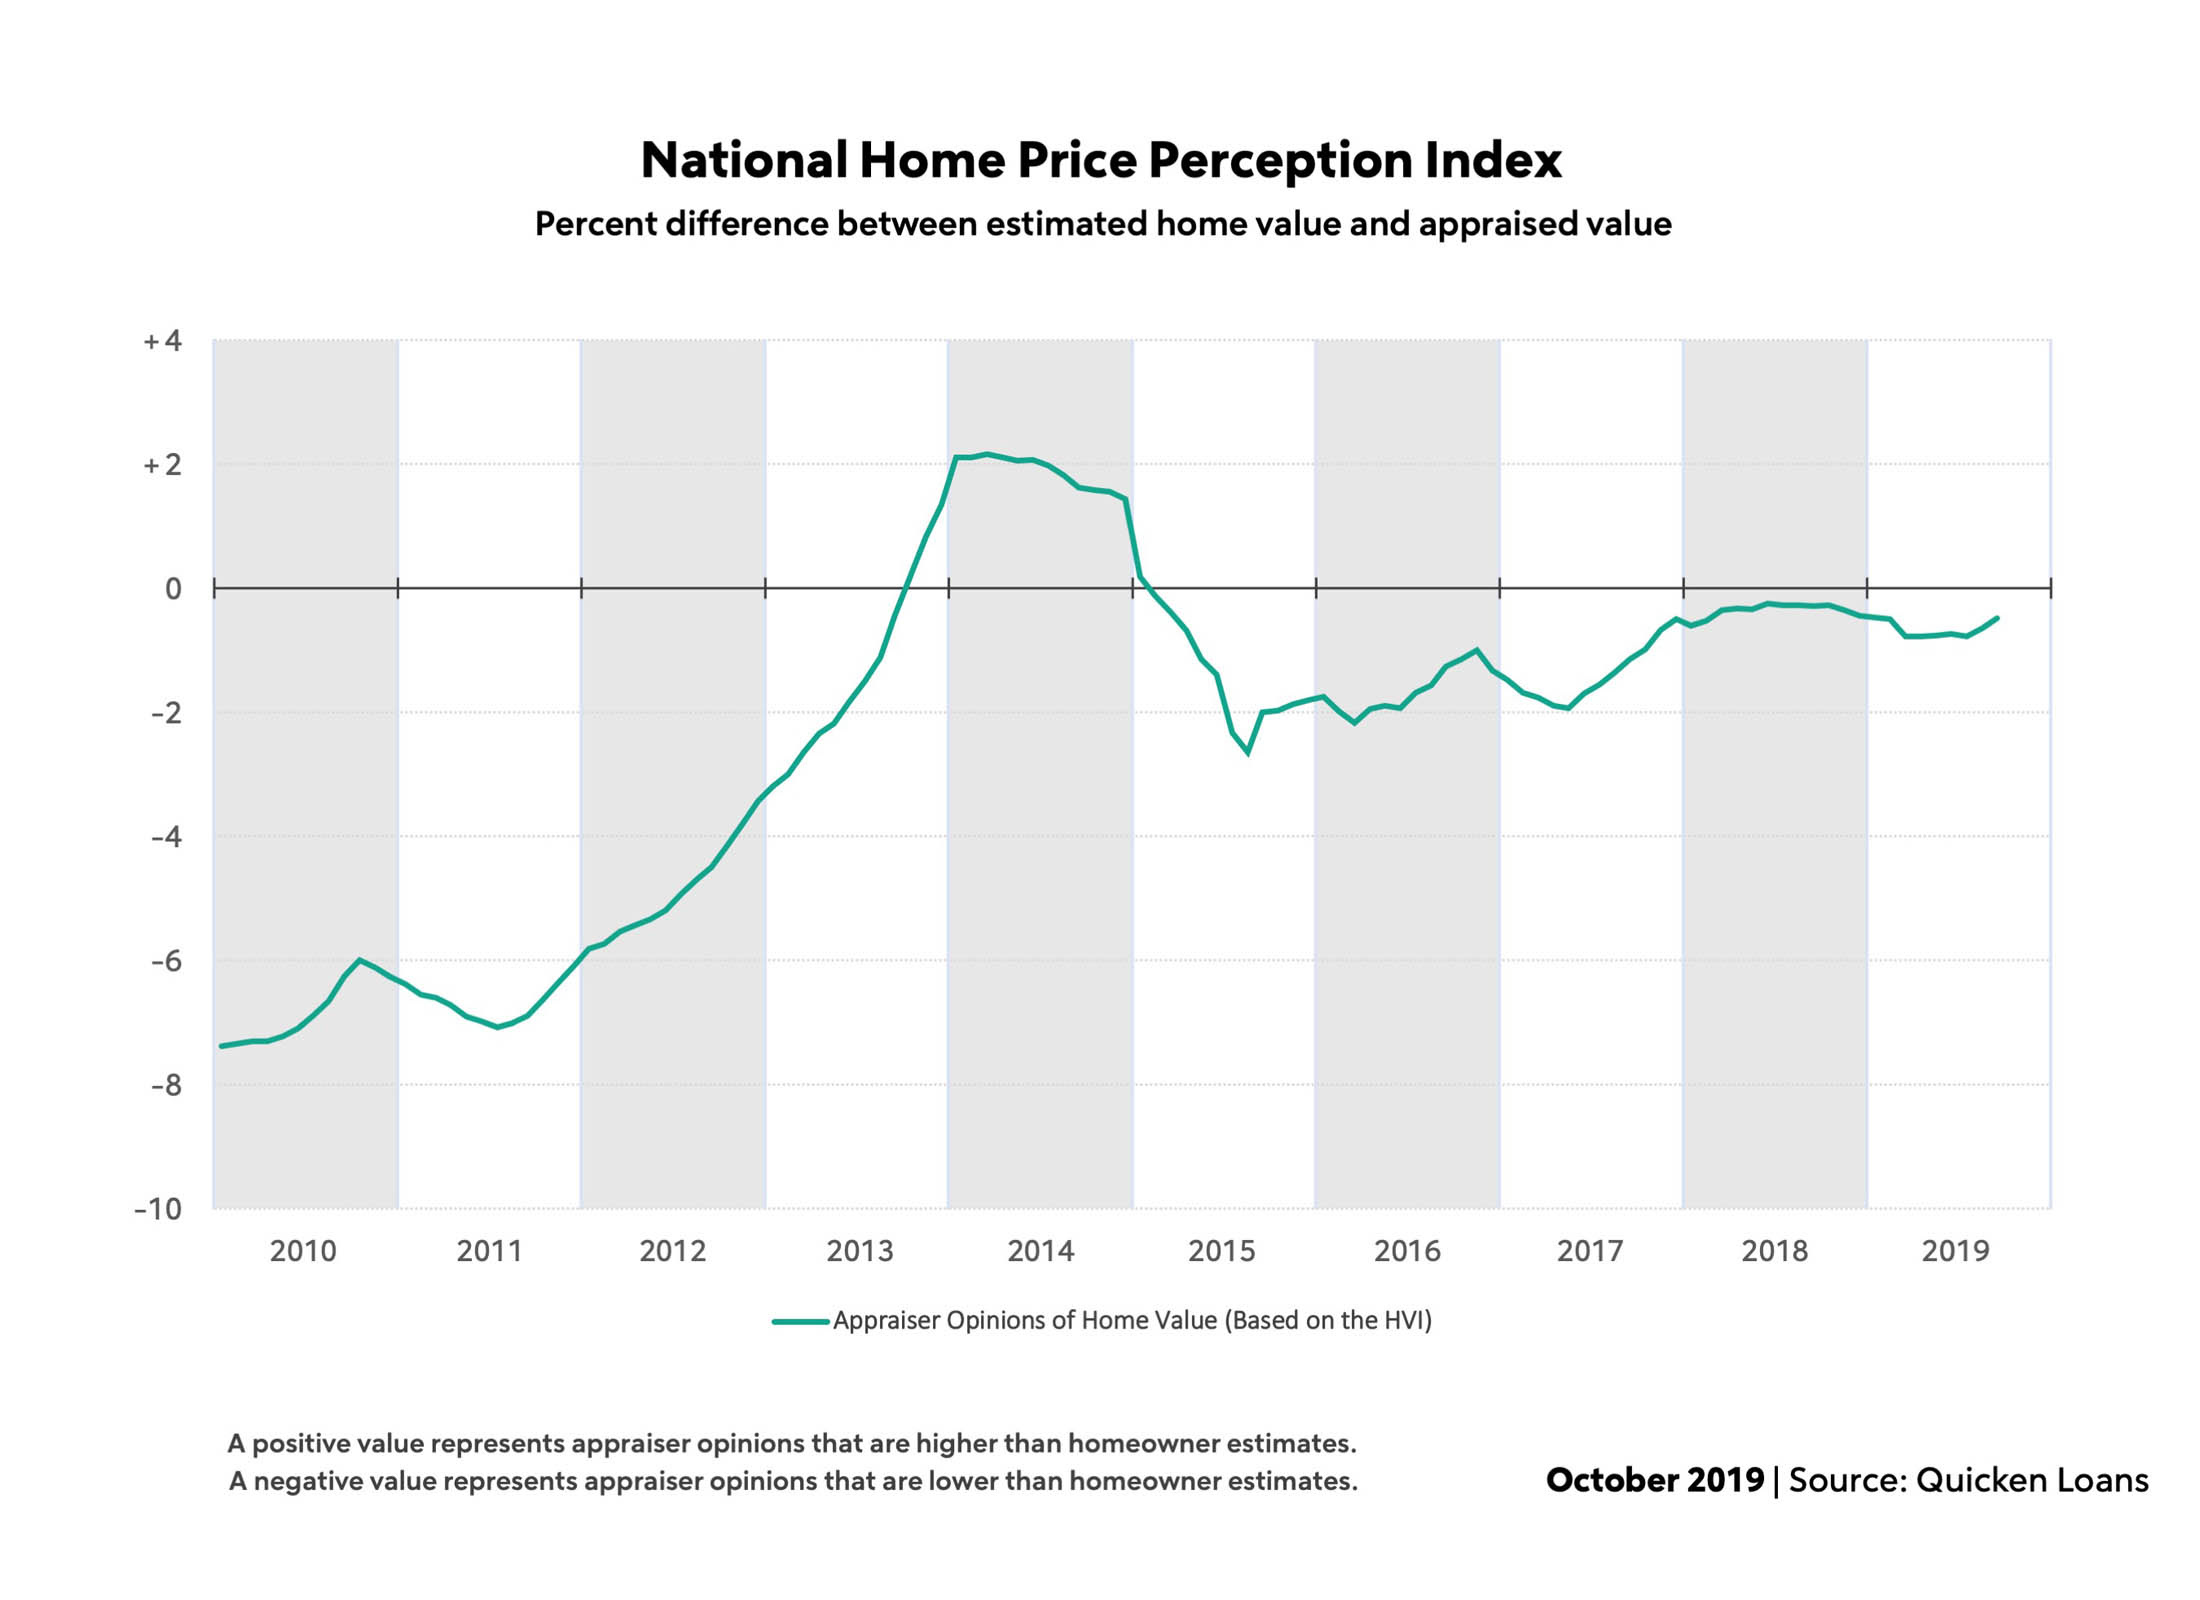 Home values were up nationally by 2.15 percent from August to September, according to new data from Quicken Loans